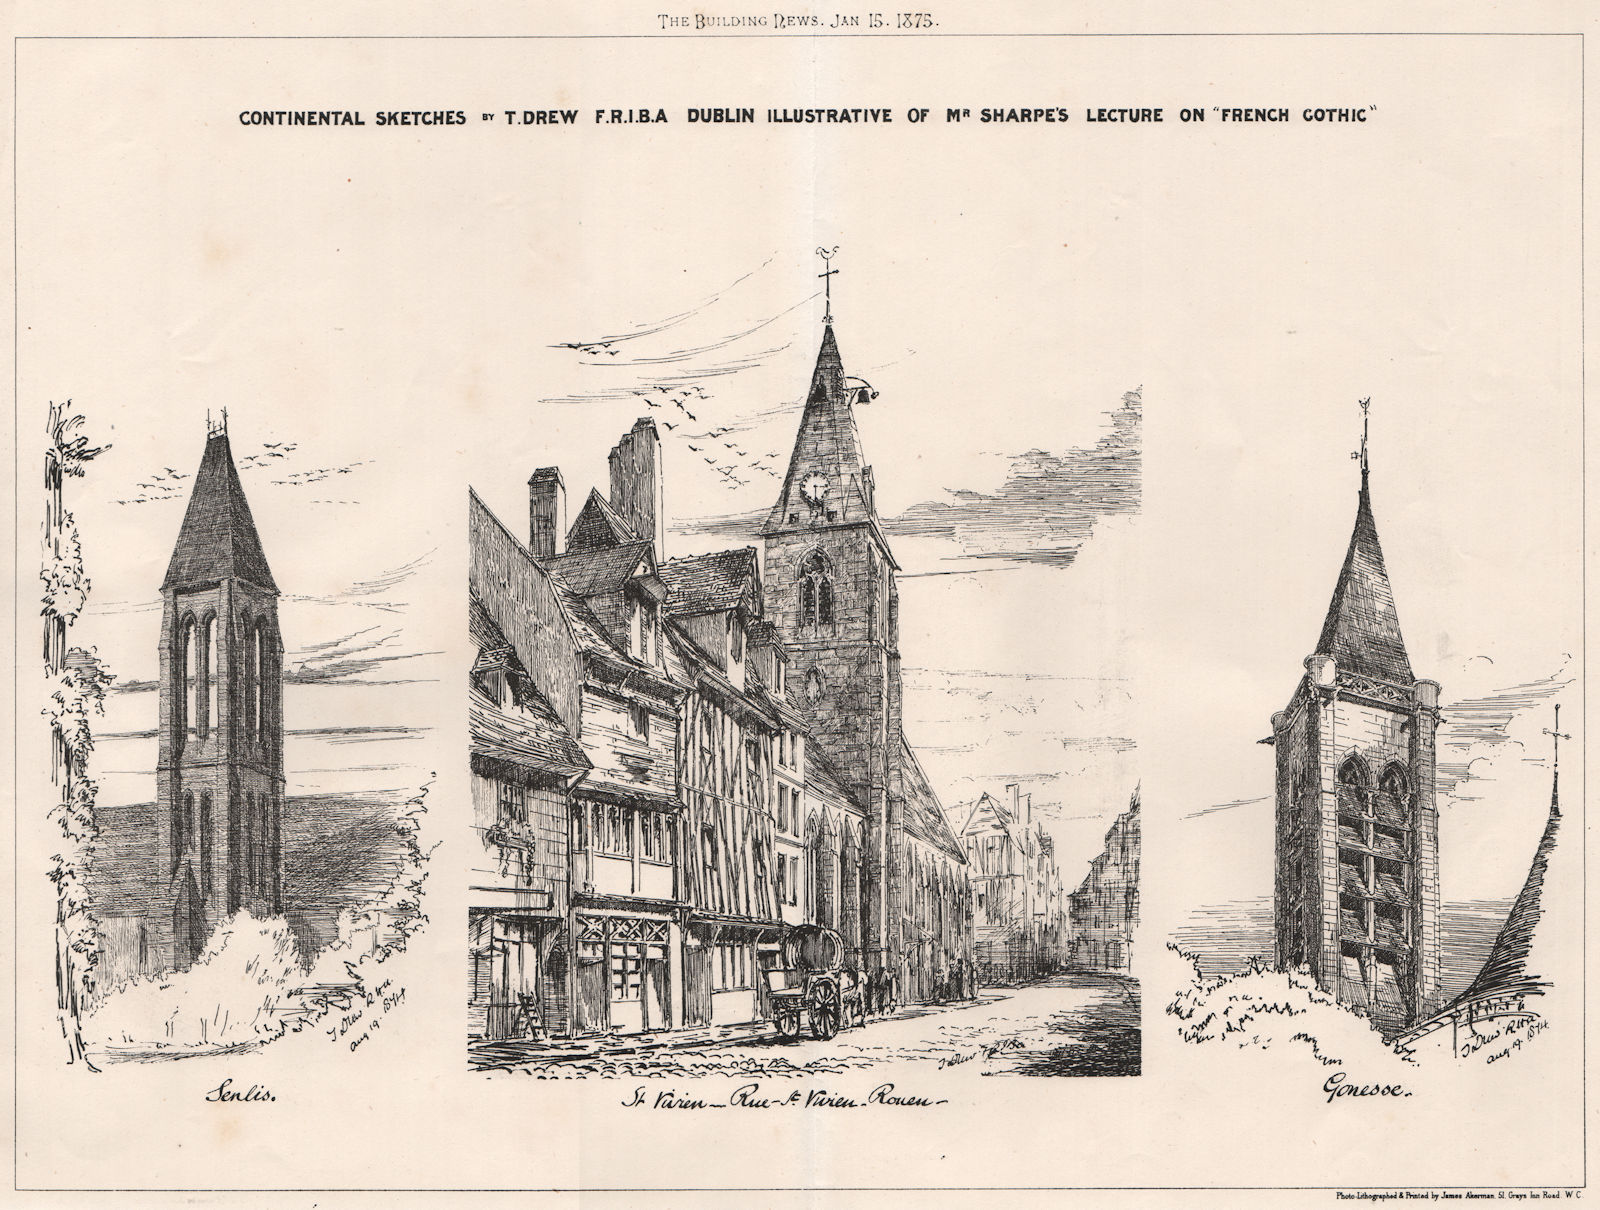 Sketches by T. Drew, illustrative of Sharpe's lecture on "French Gothic" 1875